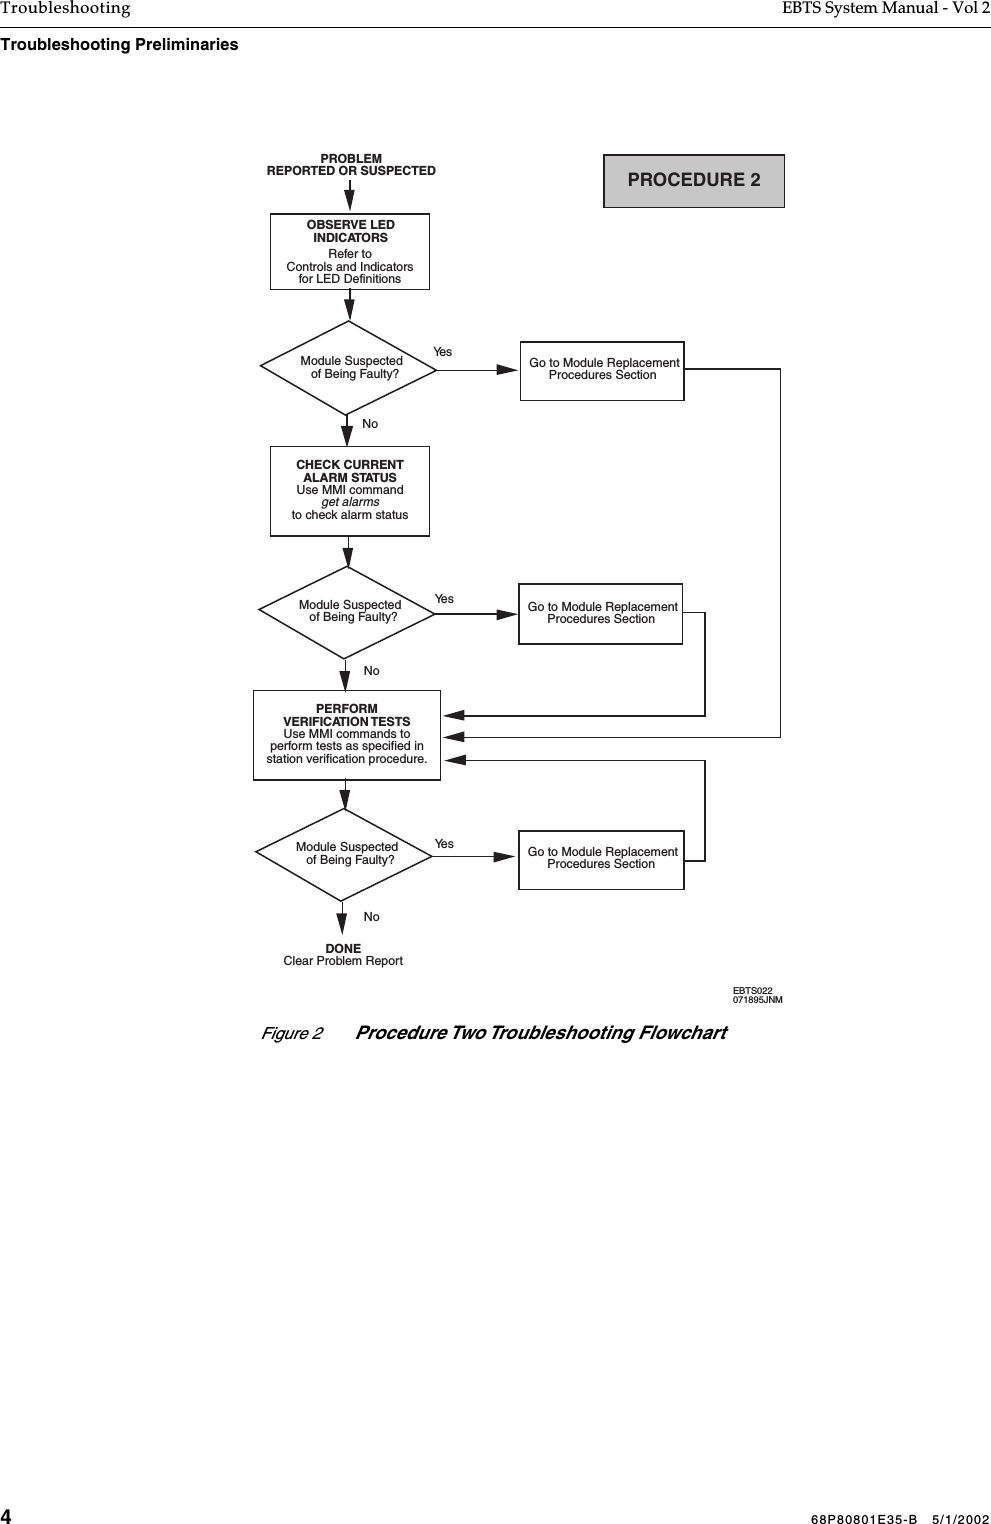 468P80801E35-B   5/1/2002Troubleshooting EBTS System Manual - Vol 2Troubleshooting Preliminaries Figure 2 Procedure Two Troubleshooting FlowchartPROCEDURE 2PROBLEMREPORTED OR SUSPECTEDDONEClear Problem ReportOBSERVE LEDINDICATORSModule Suspected  of Being Faulty?Ye s  Go to Module ReplacementProcedures SectionNoCHECK CURRENTALARM STATUSUse MMI commandget alarmsto check alarm statusModule Suspected  of Being Faulty?  Go to Module ReplacementProcedures SectionPERFORMVERIFICATION TESTSUse MMI commands toperform tests as specified instation verification procedure.Module Suspected  of Being Faulty?  Go to Module ReplacementProcedures SectionYe sNoYe sNoRefer toControls and Indicatorsfor LED DefinitionsEBTS022071895JNM